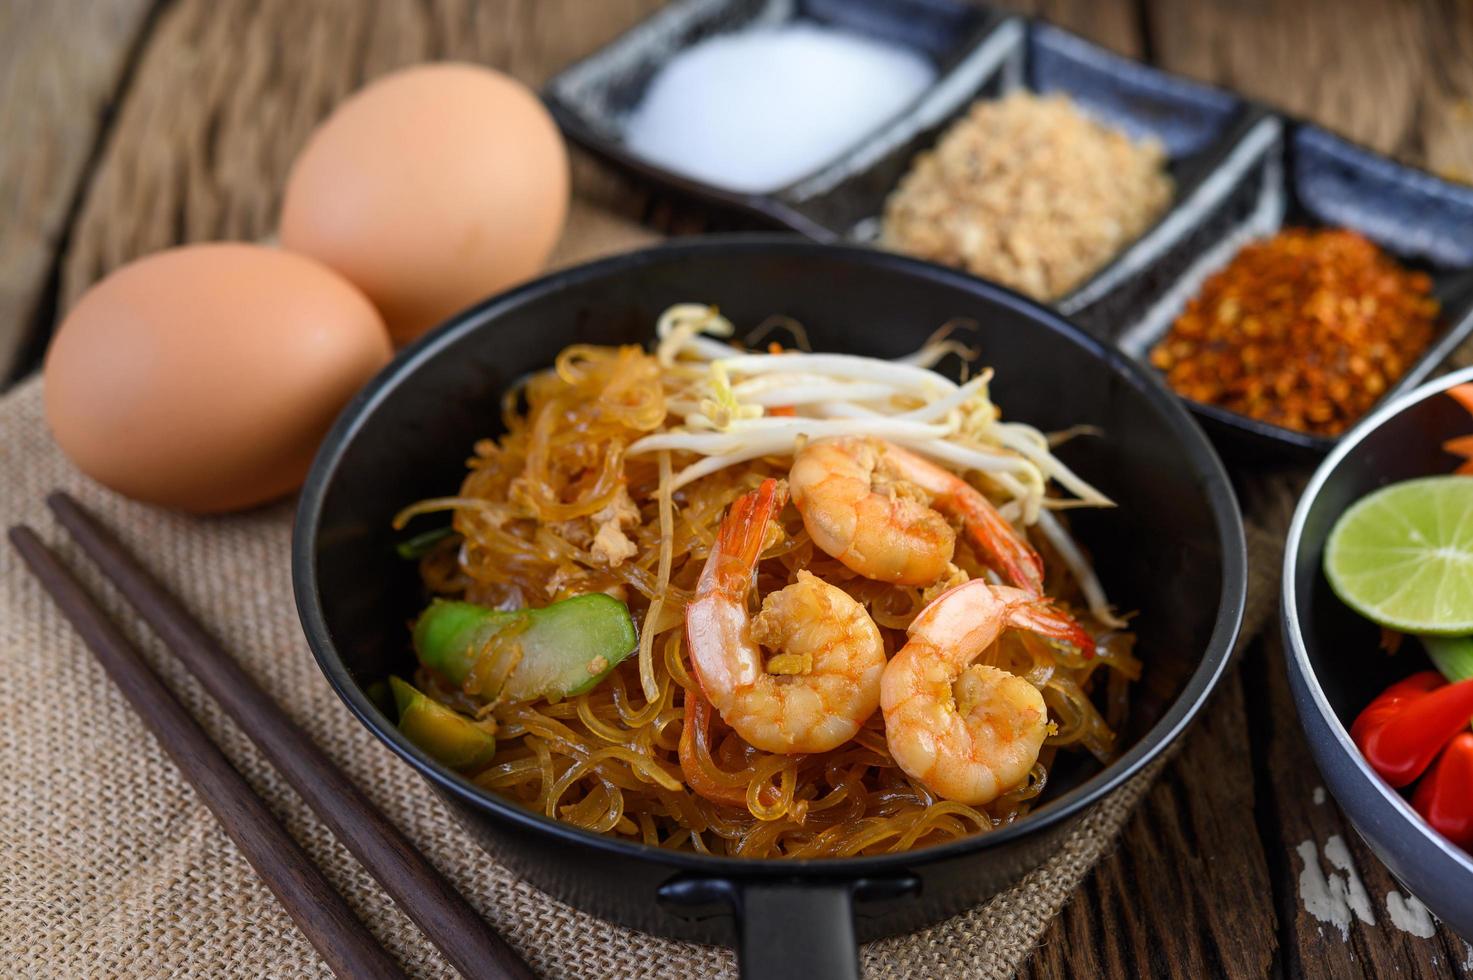 Pad thai shrimp in a black pan with eggs and seasoning photo